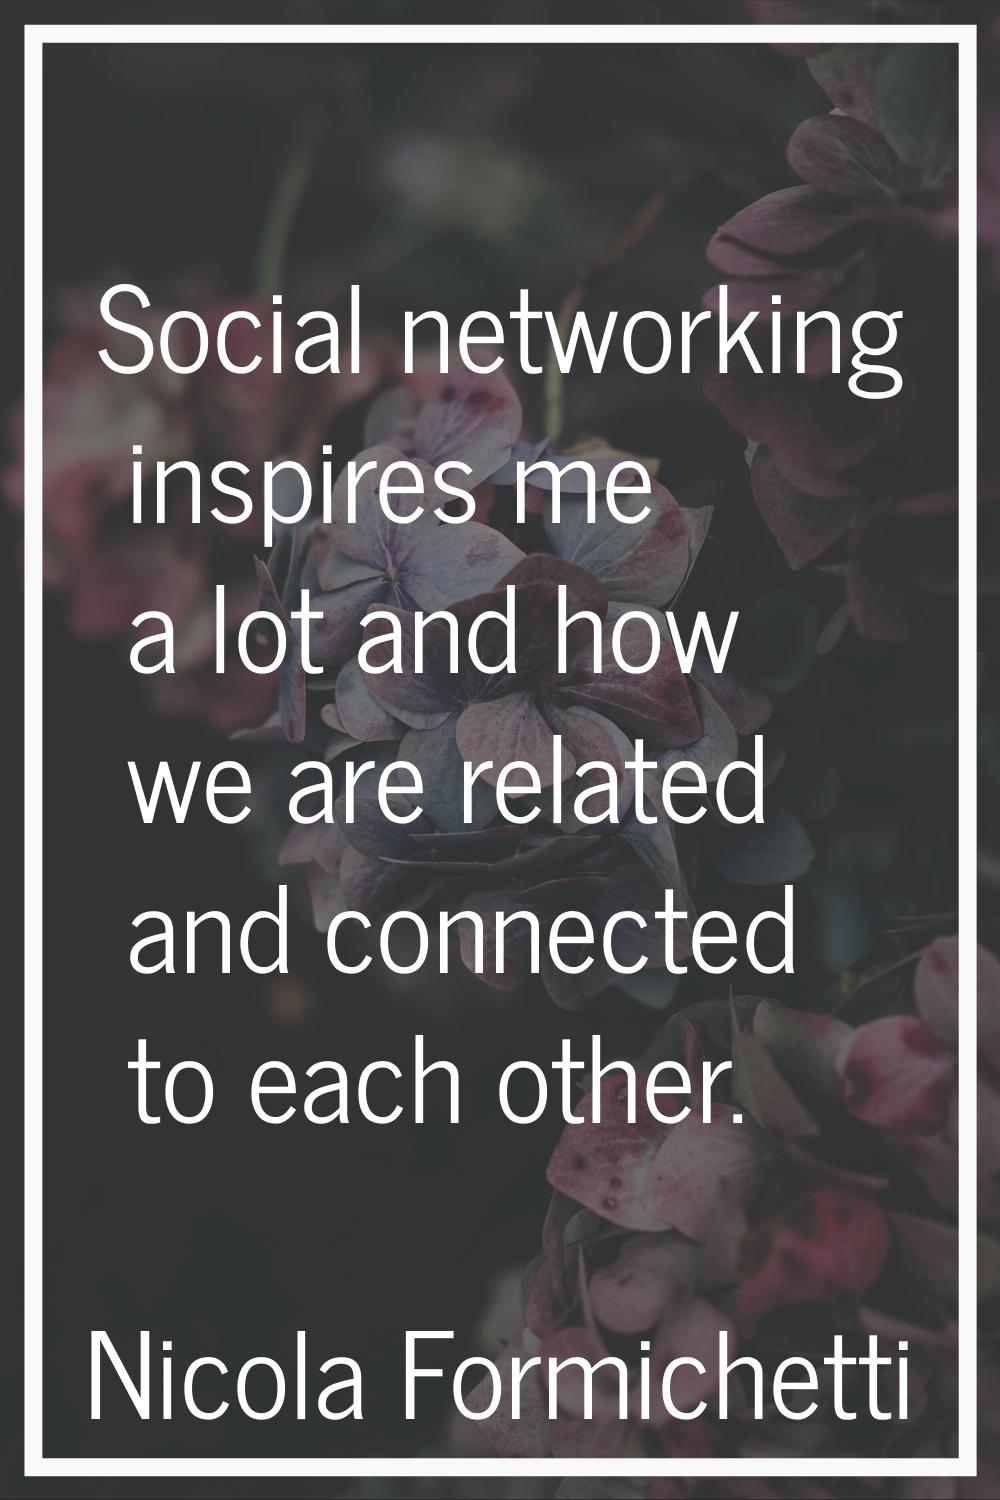 Social networking inspires me a lot and how we are related and connected to each other.